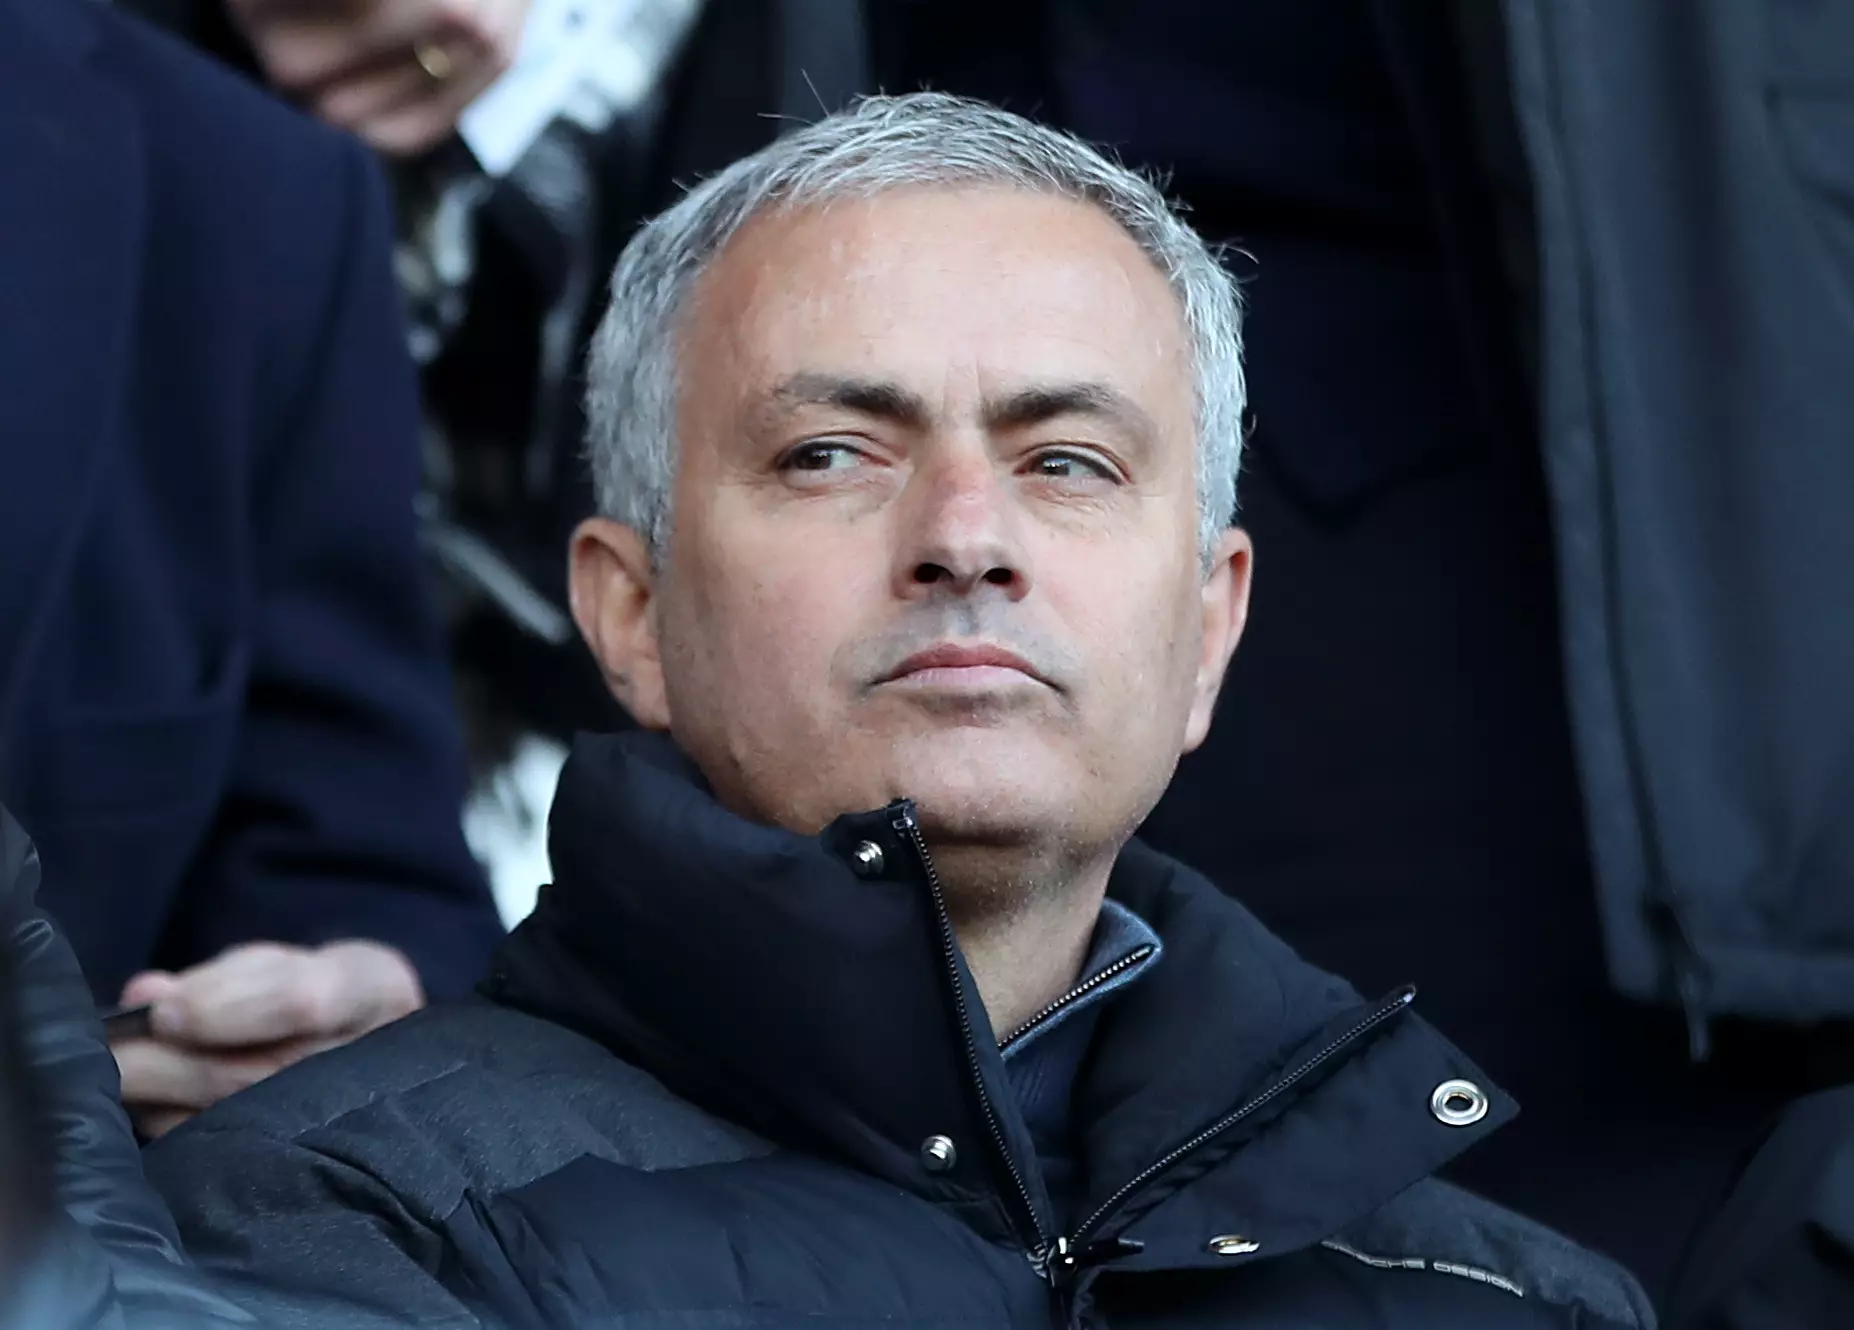 Jose Mourinho Takes Another Dig At Arsene Wenger In His Latest Press Conference